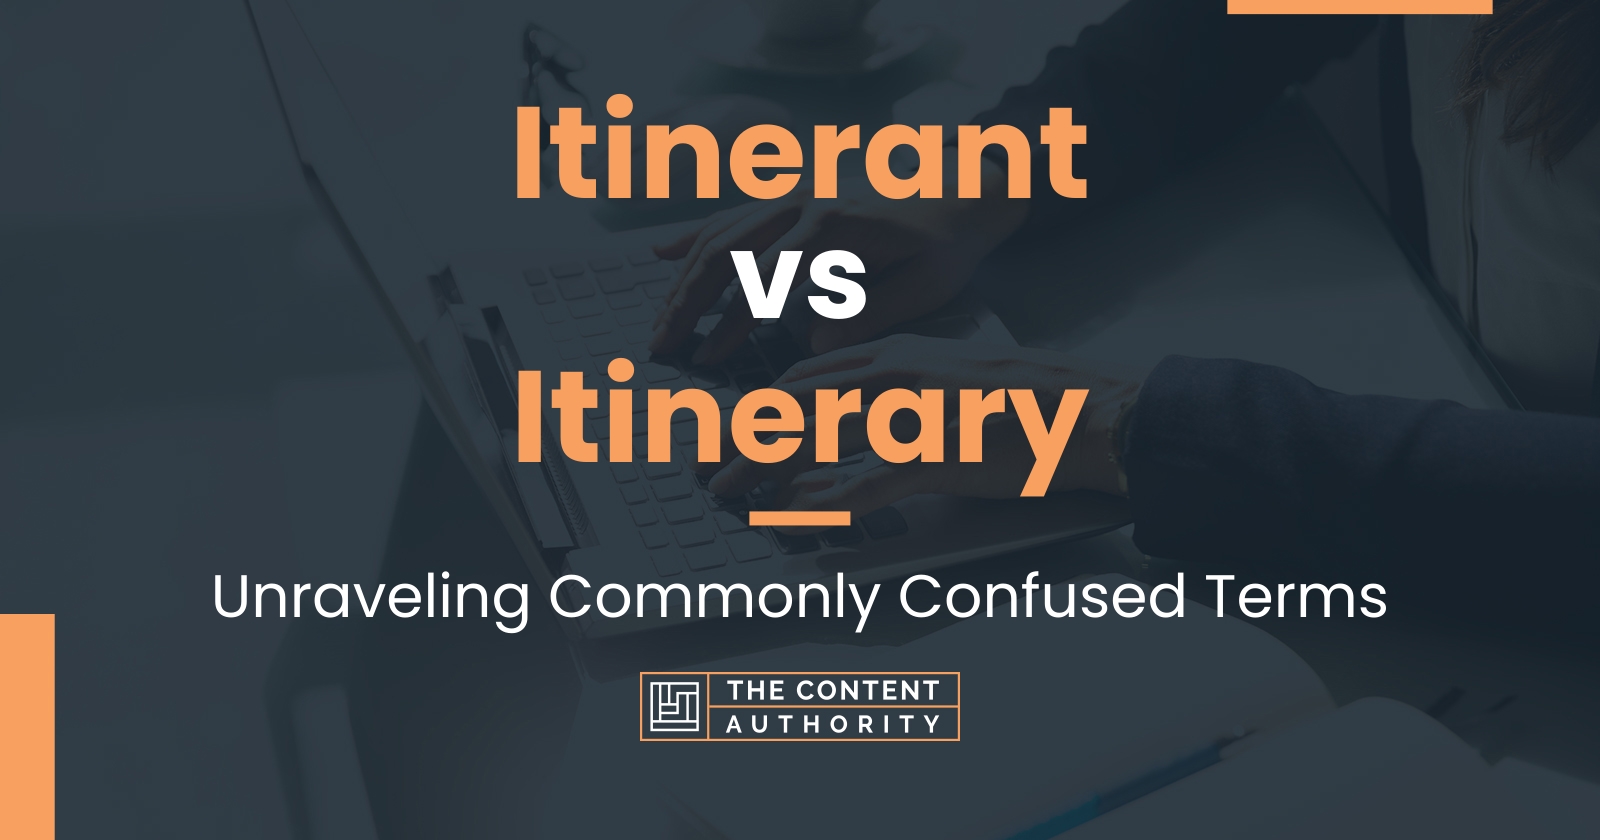 Itinerant vs Itinerary: Unraveling Commonly Confused Terms